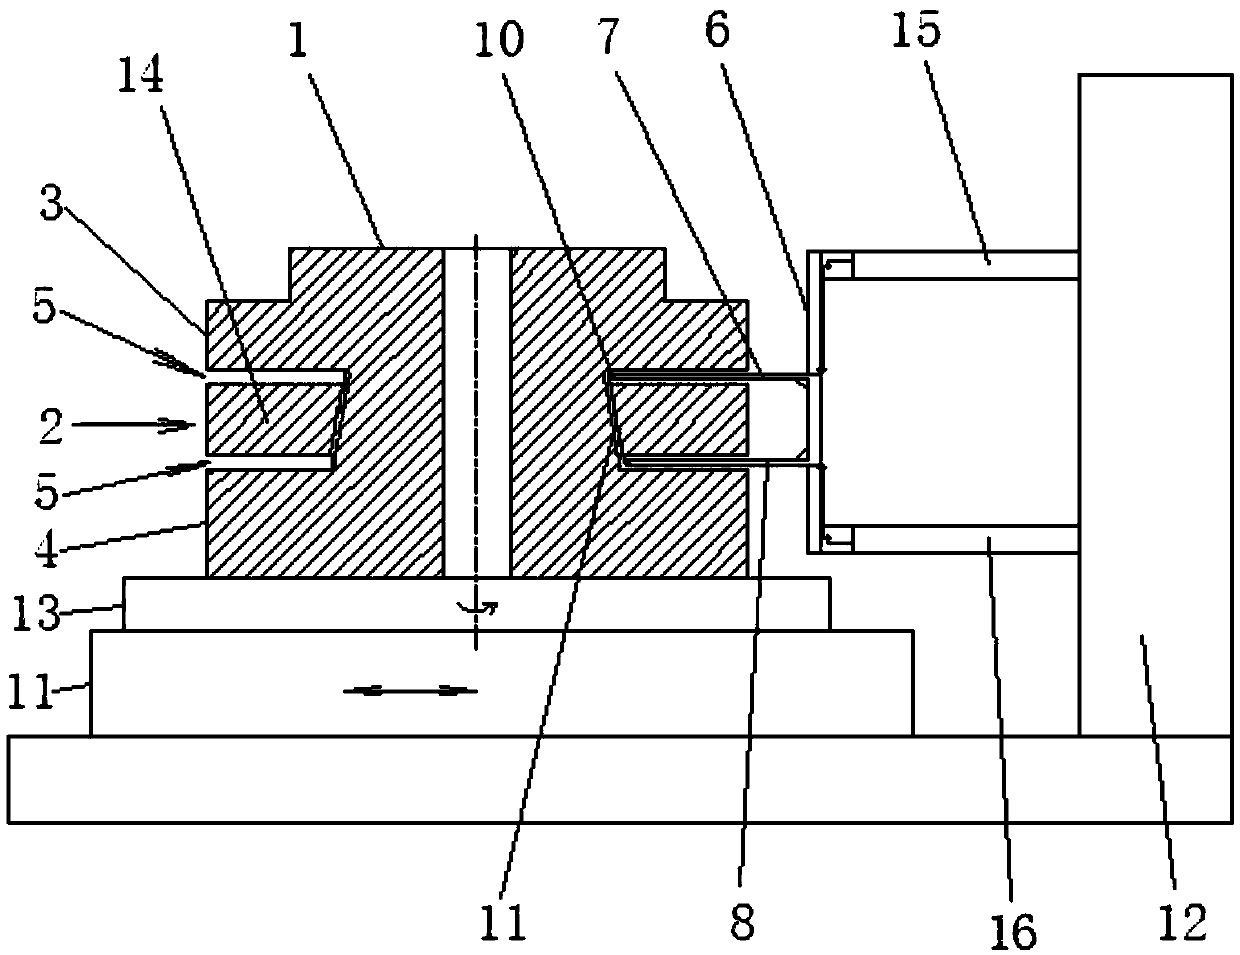 Large double-head shaft connecting flange blank manufacturing process and tool